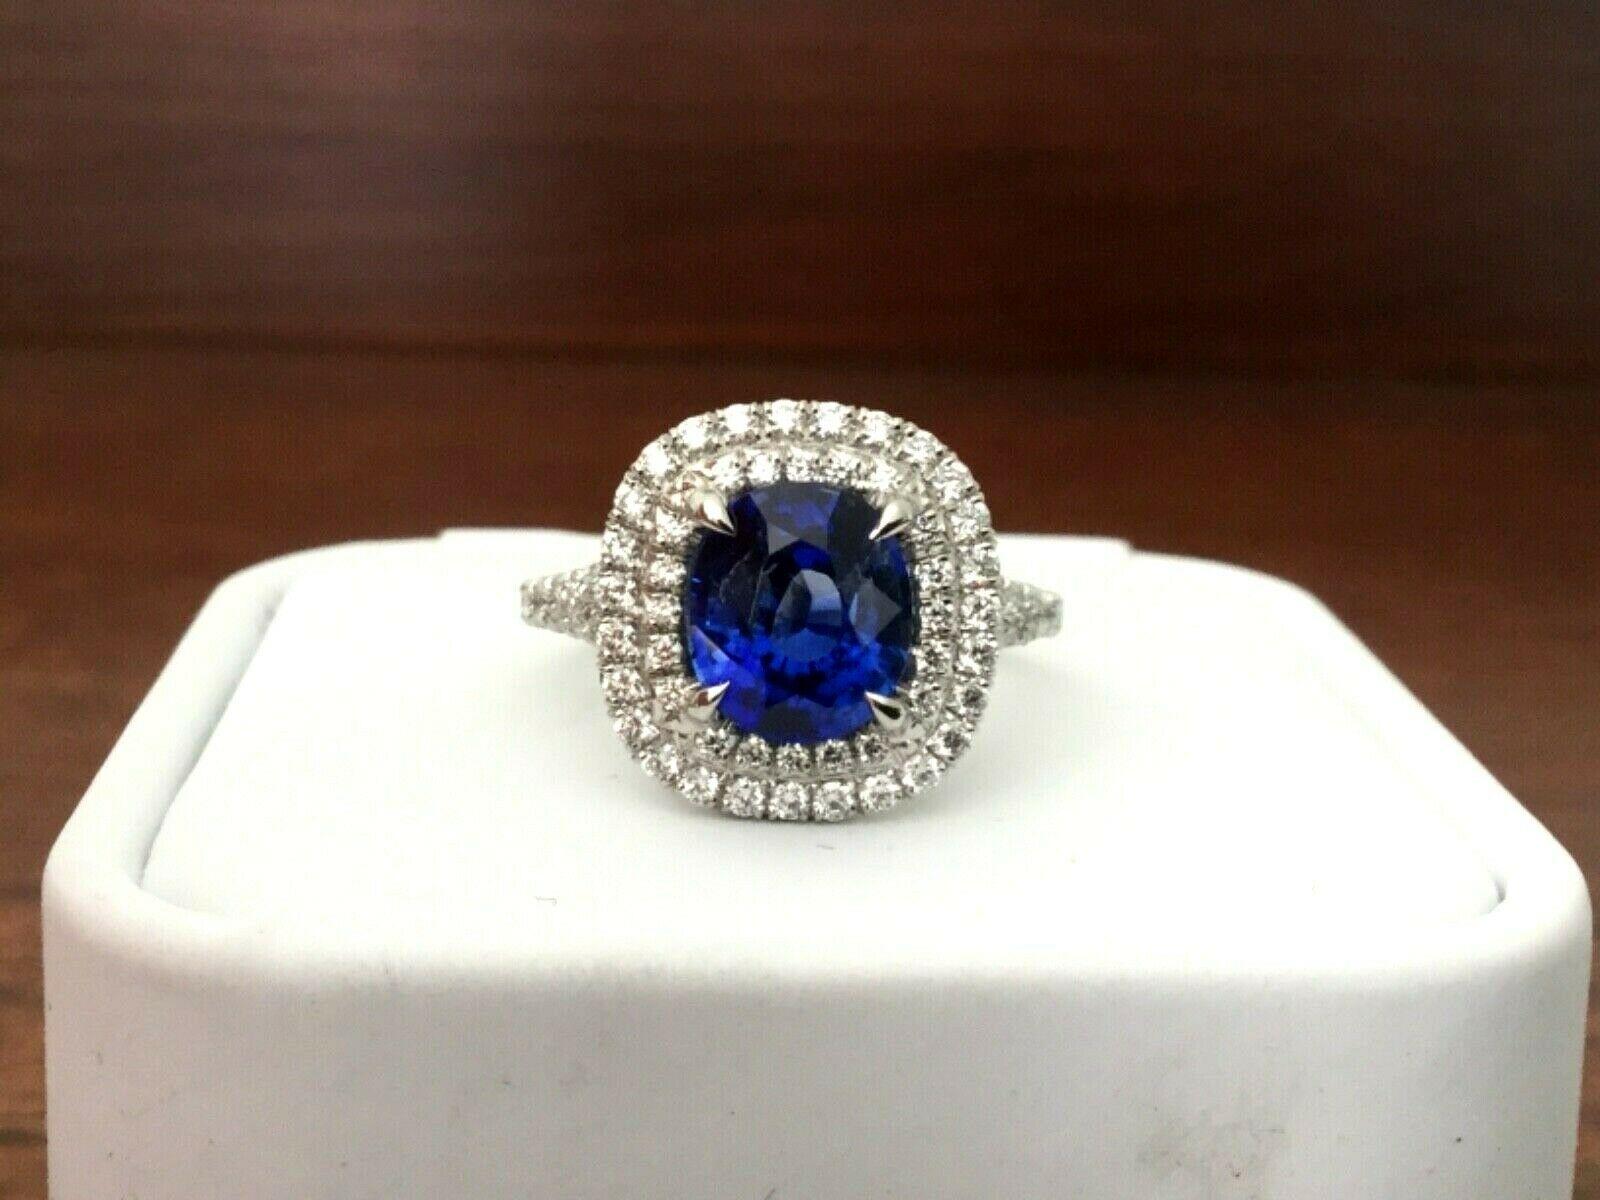 For your consideration is a 2.68 carat OVAL cut, natural, deep royal blue sapphire set in a brand new platinum double halo setting with .63 carats of natural G color VS clarity white diamonds.  The sapphire is GIA certified and has been beryllium